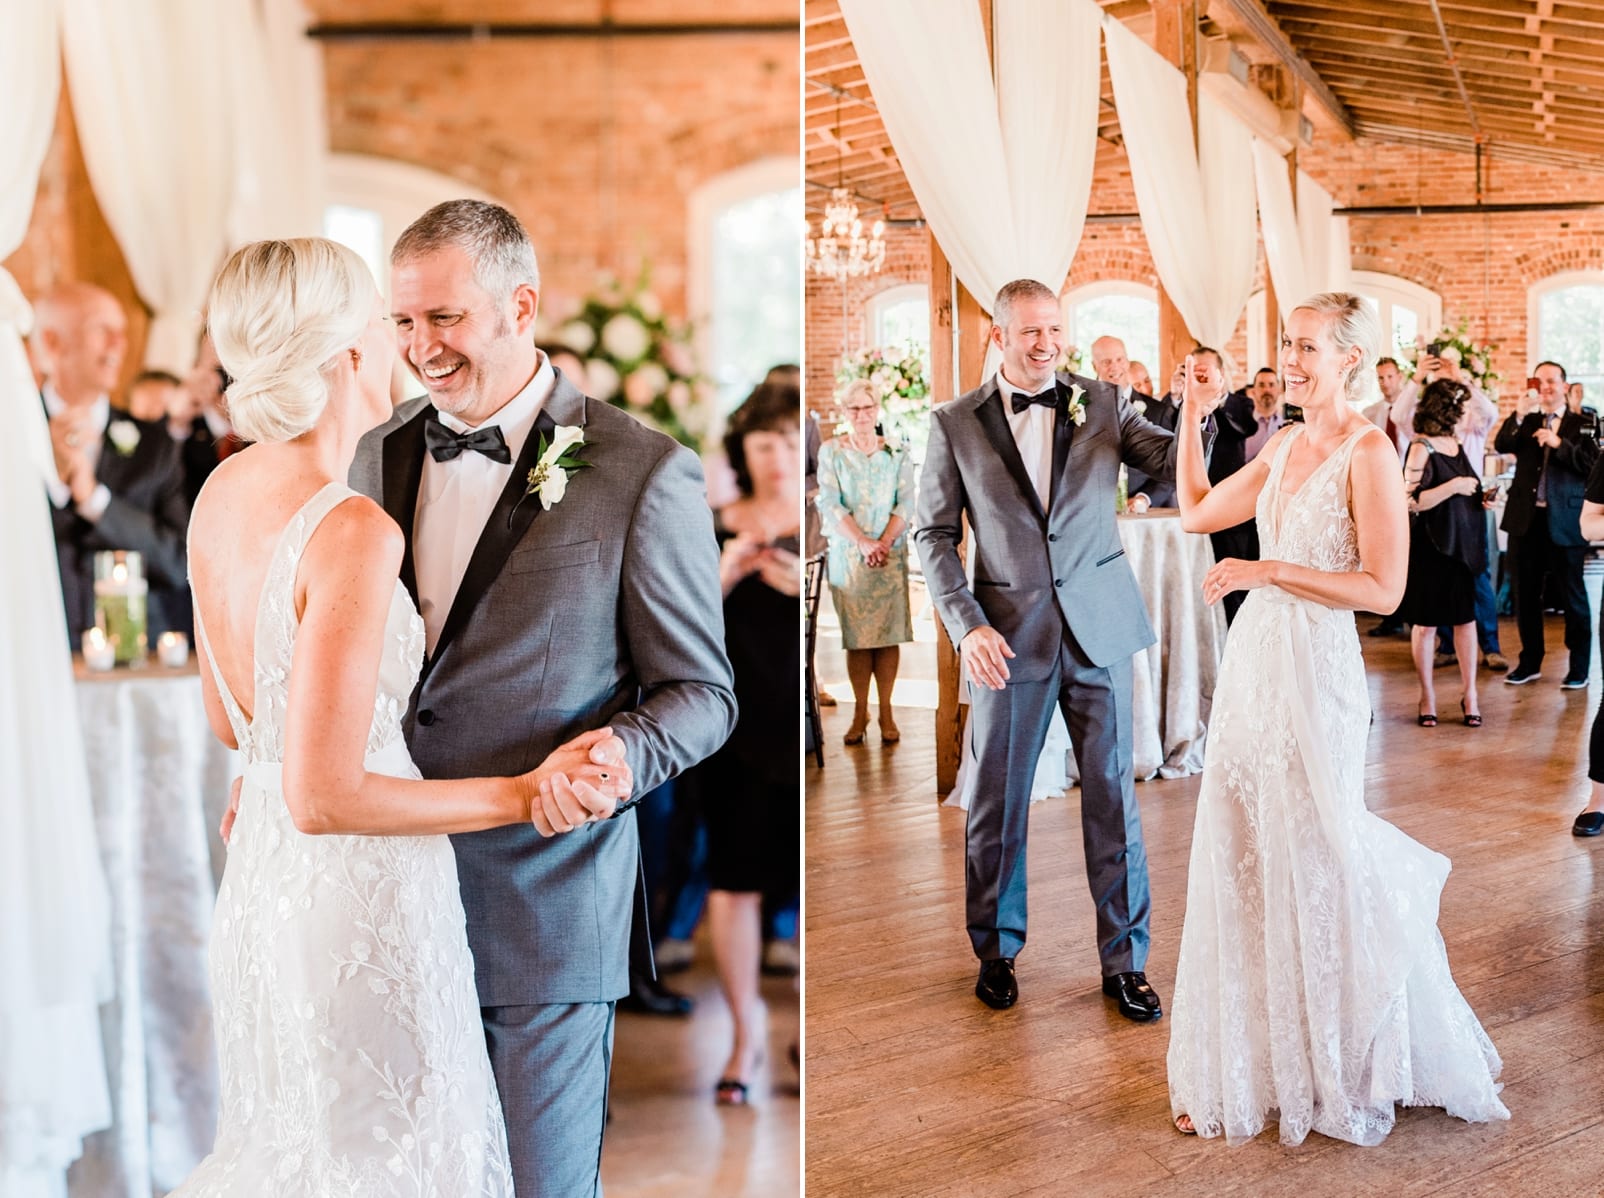 Melrose Knitting Mill bride and groom first dance photo